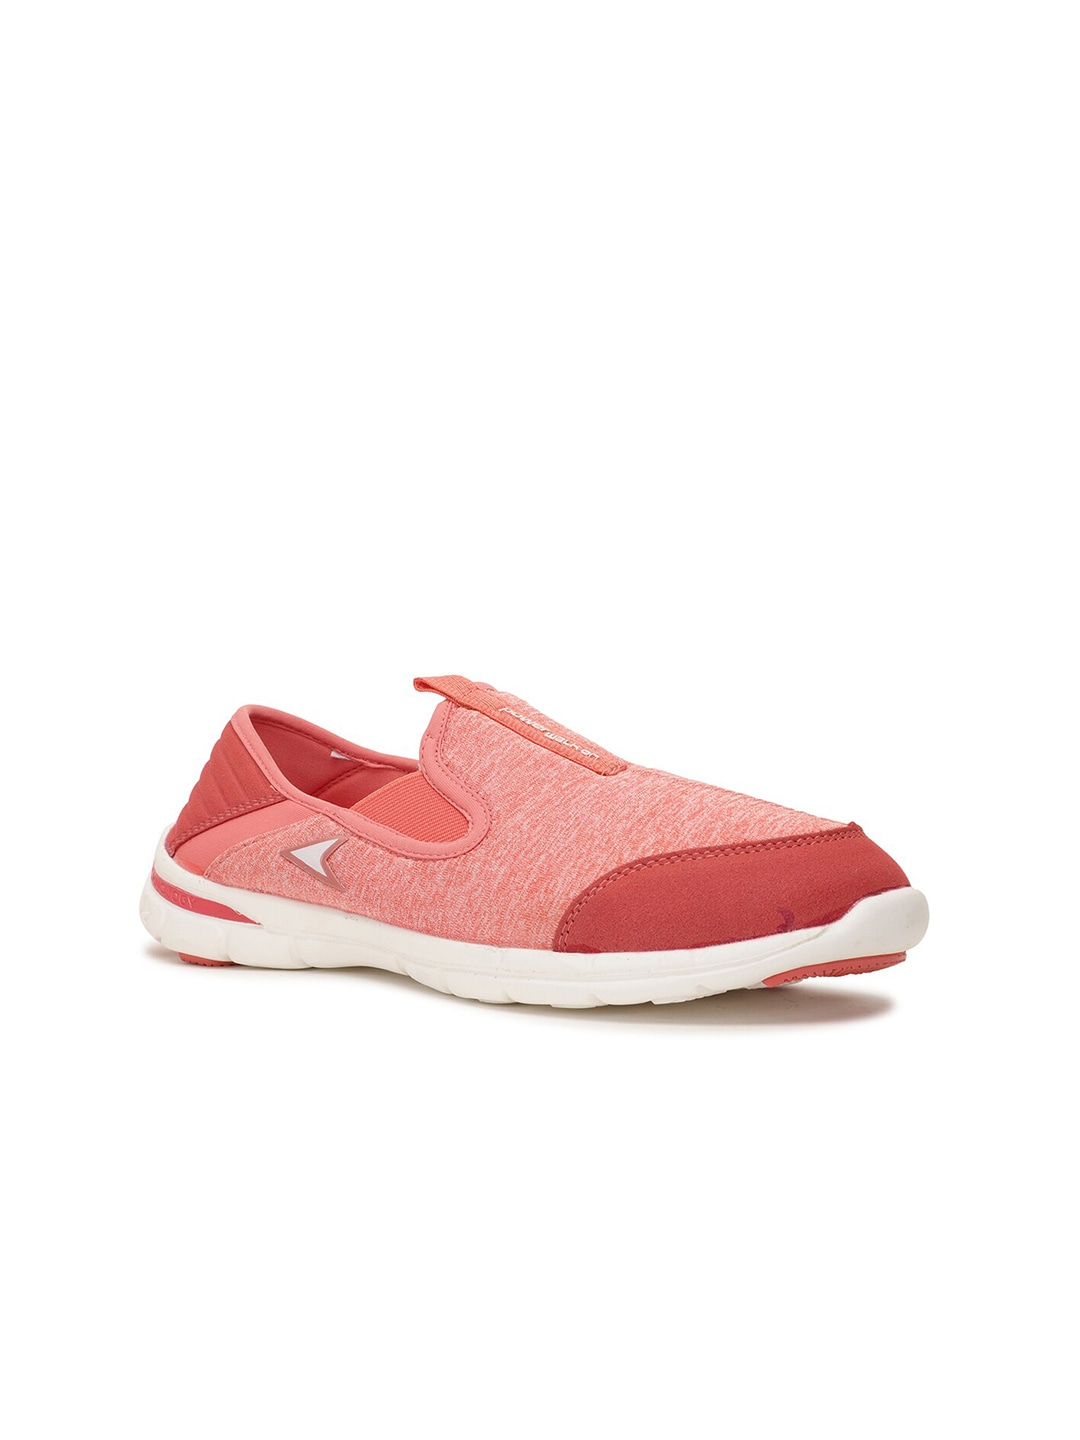 Power Women Peach-Coloured Textile Walking Non-Marking Shoes Price in India